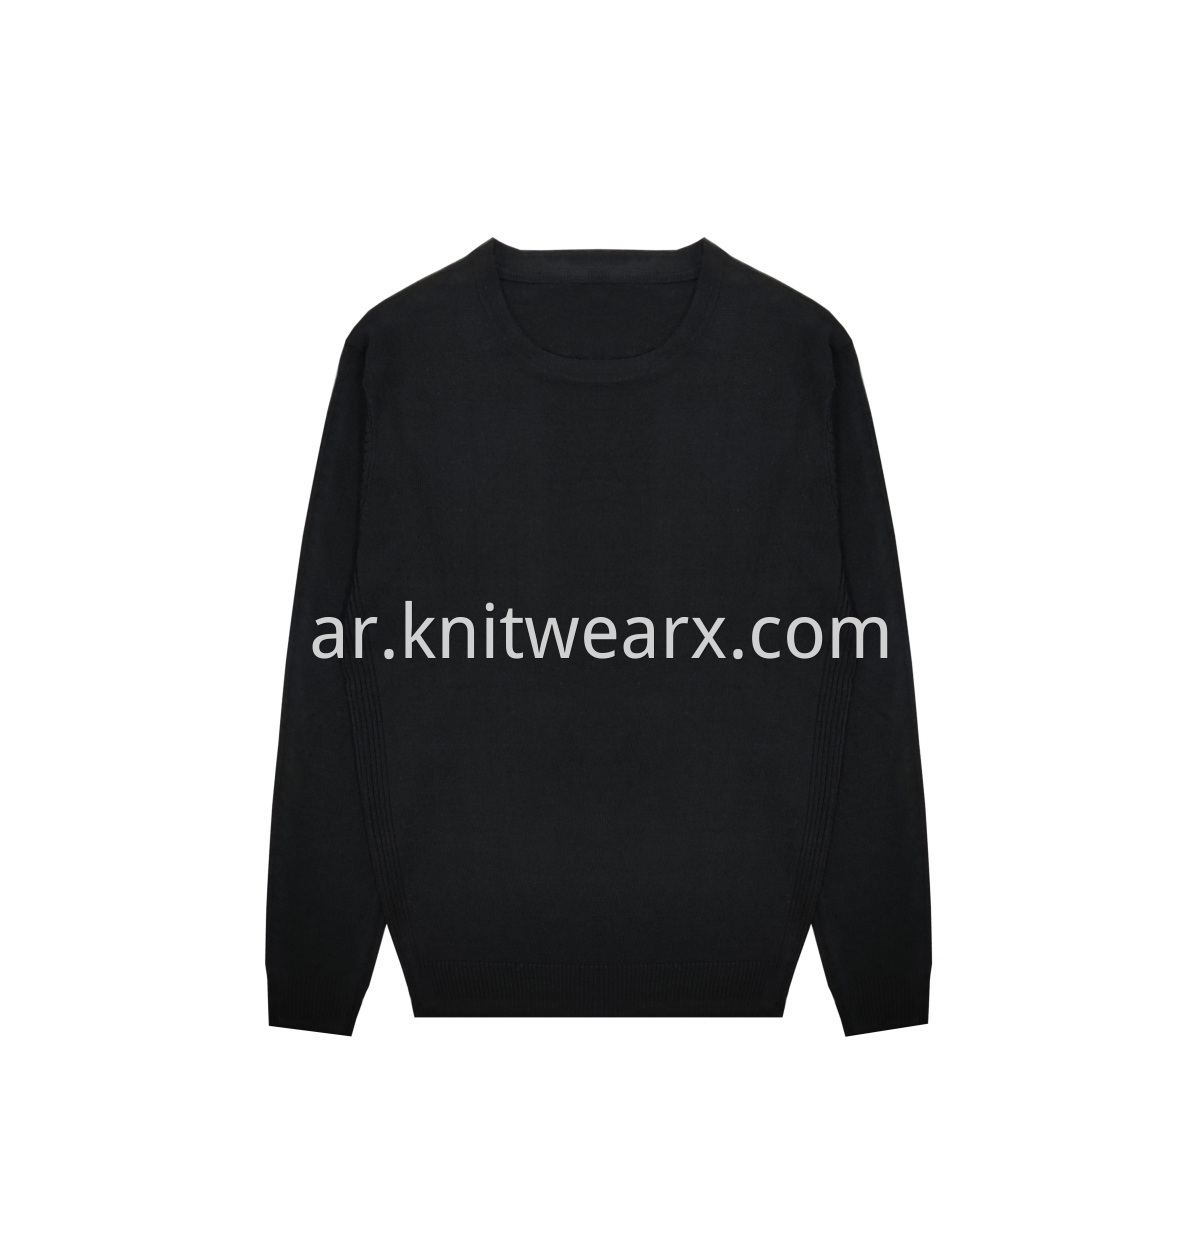 Men's Knitted Sweater Anti-pilling Crewneck Pullover